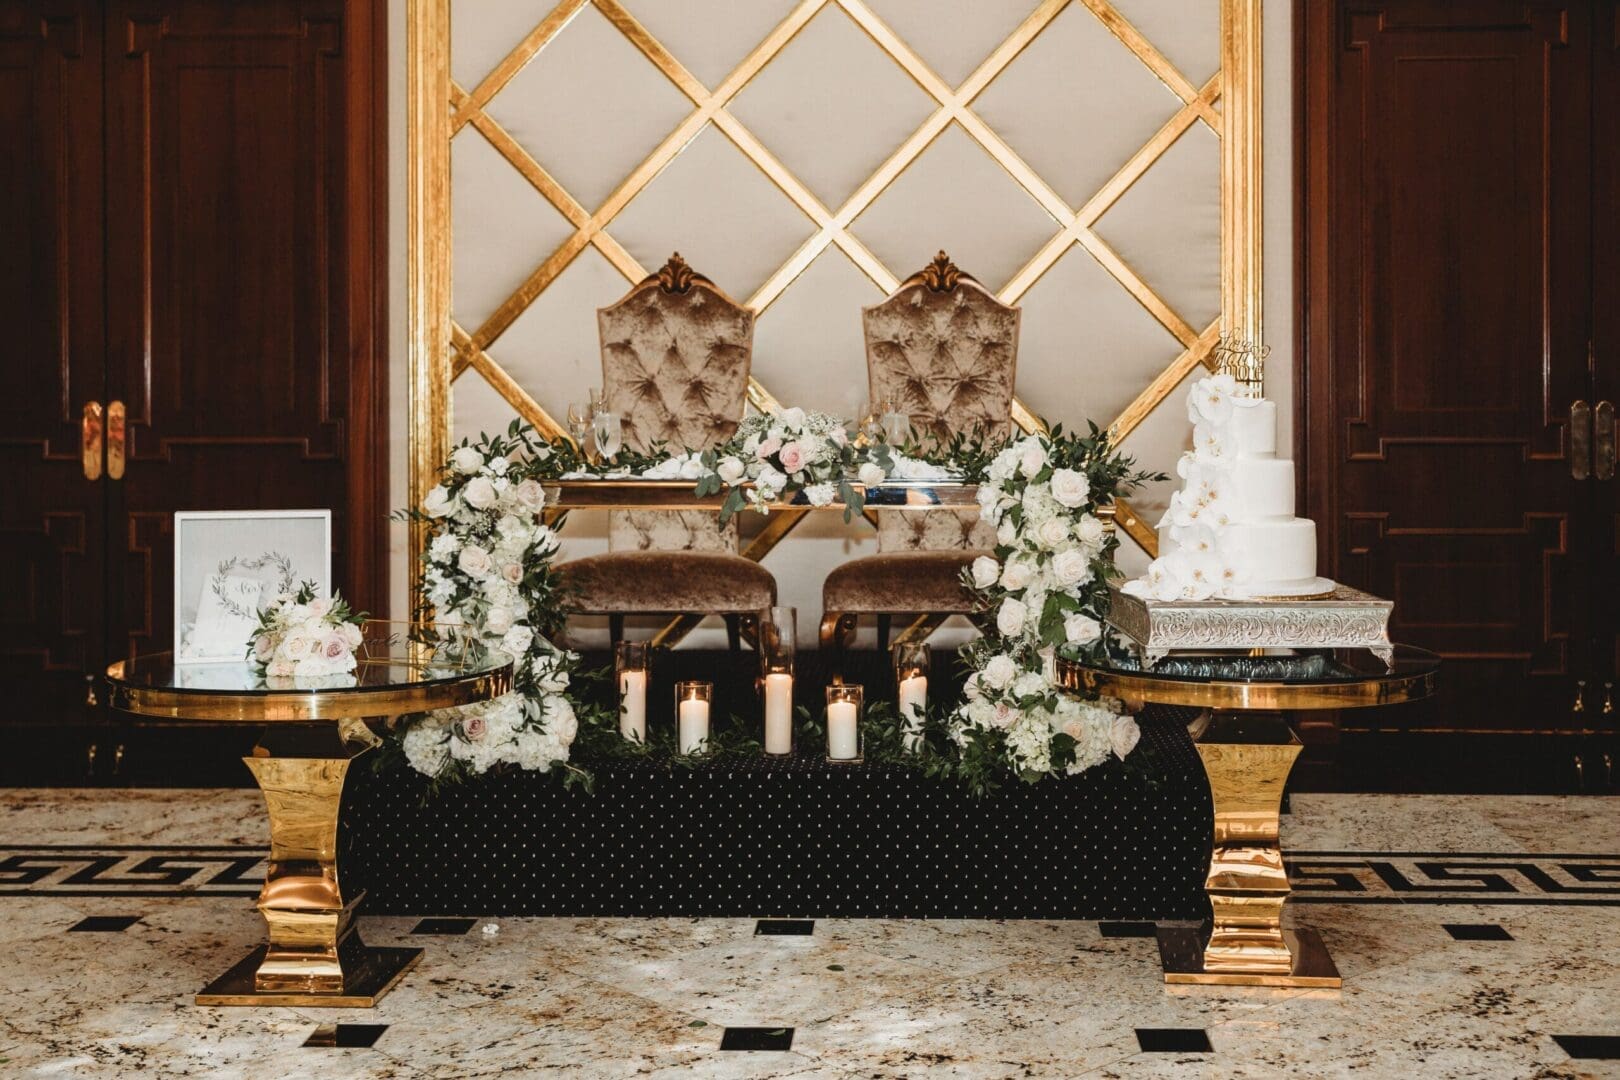 A gold and white wedding table with candles and flowers.